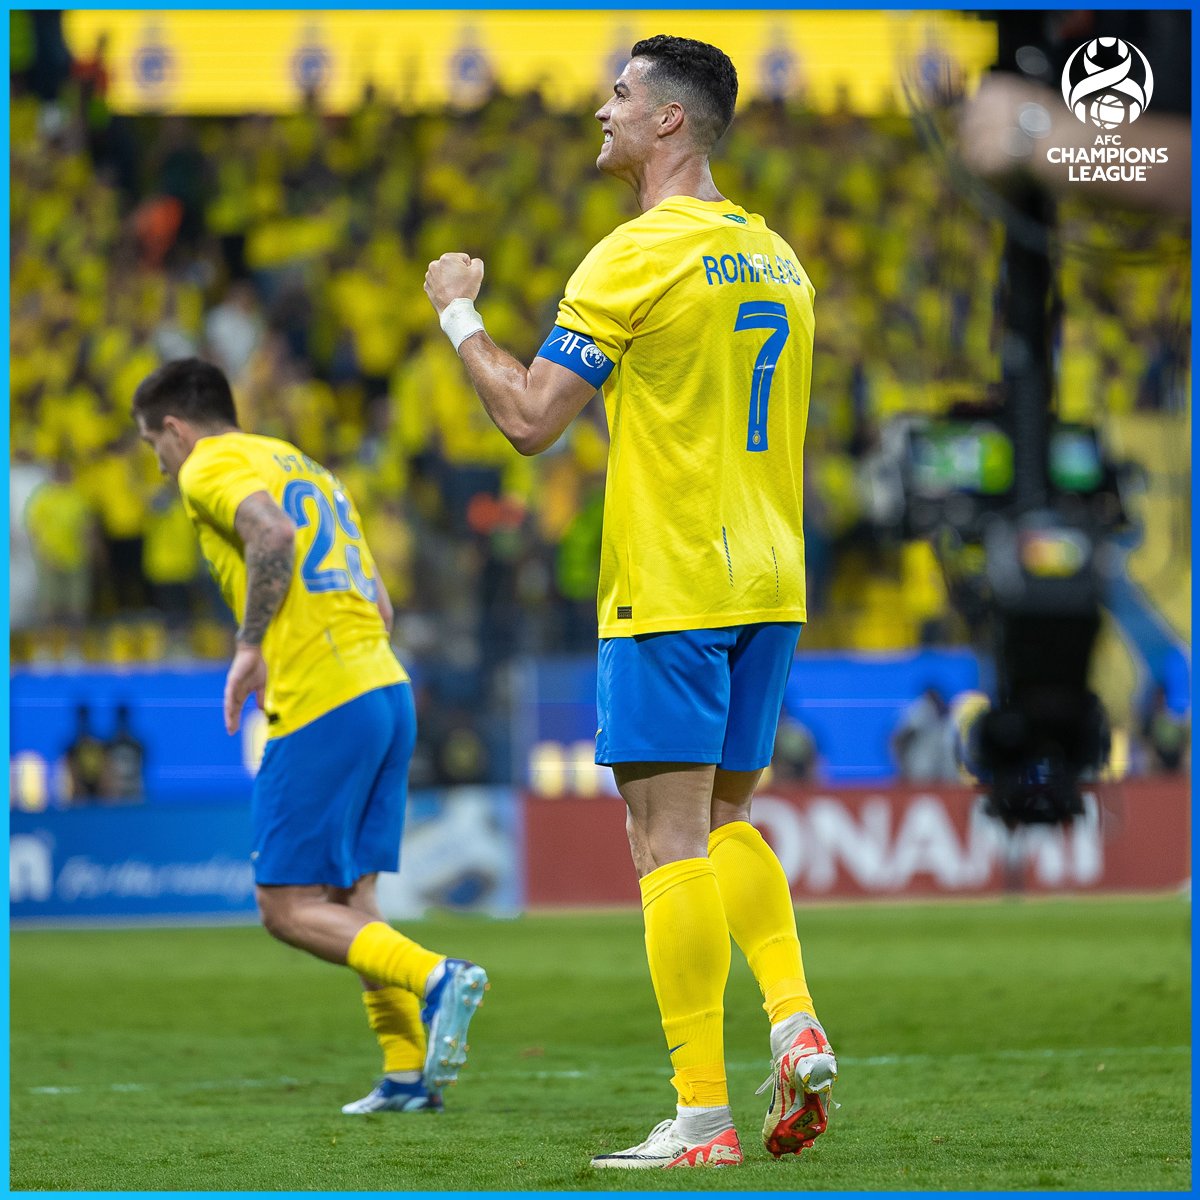 ACL on X: ✨ 𝗤𝗨𝗔𝗟𝗜𝗙𝗜𝗘𝗗 ✨ ©️ Captain Ronaldo leads 🇸🇦 Al Nassr  into the #ACL Group Stage!  / X